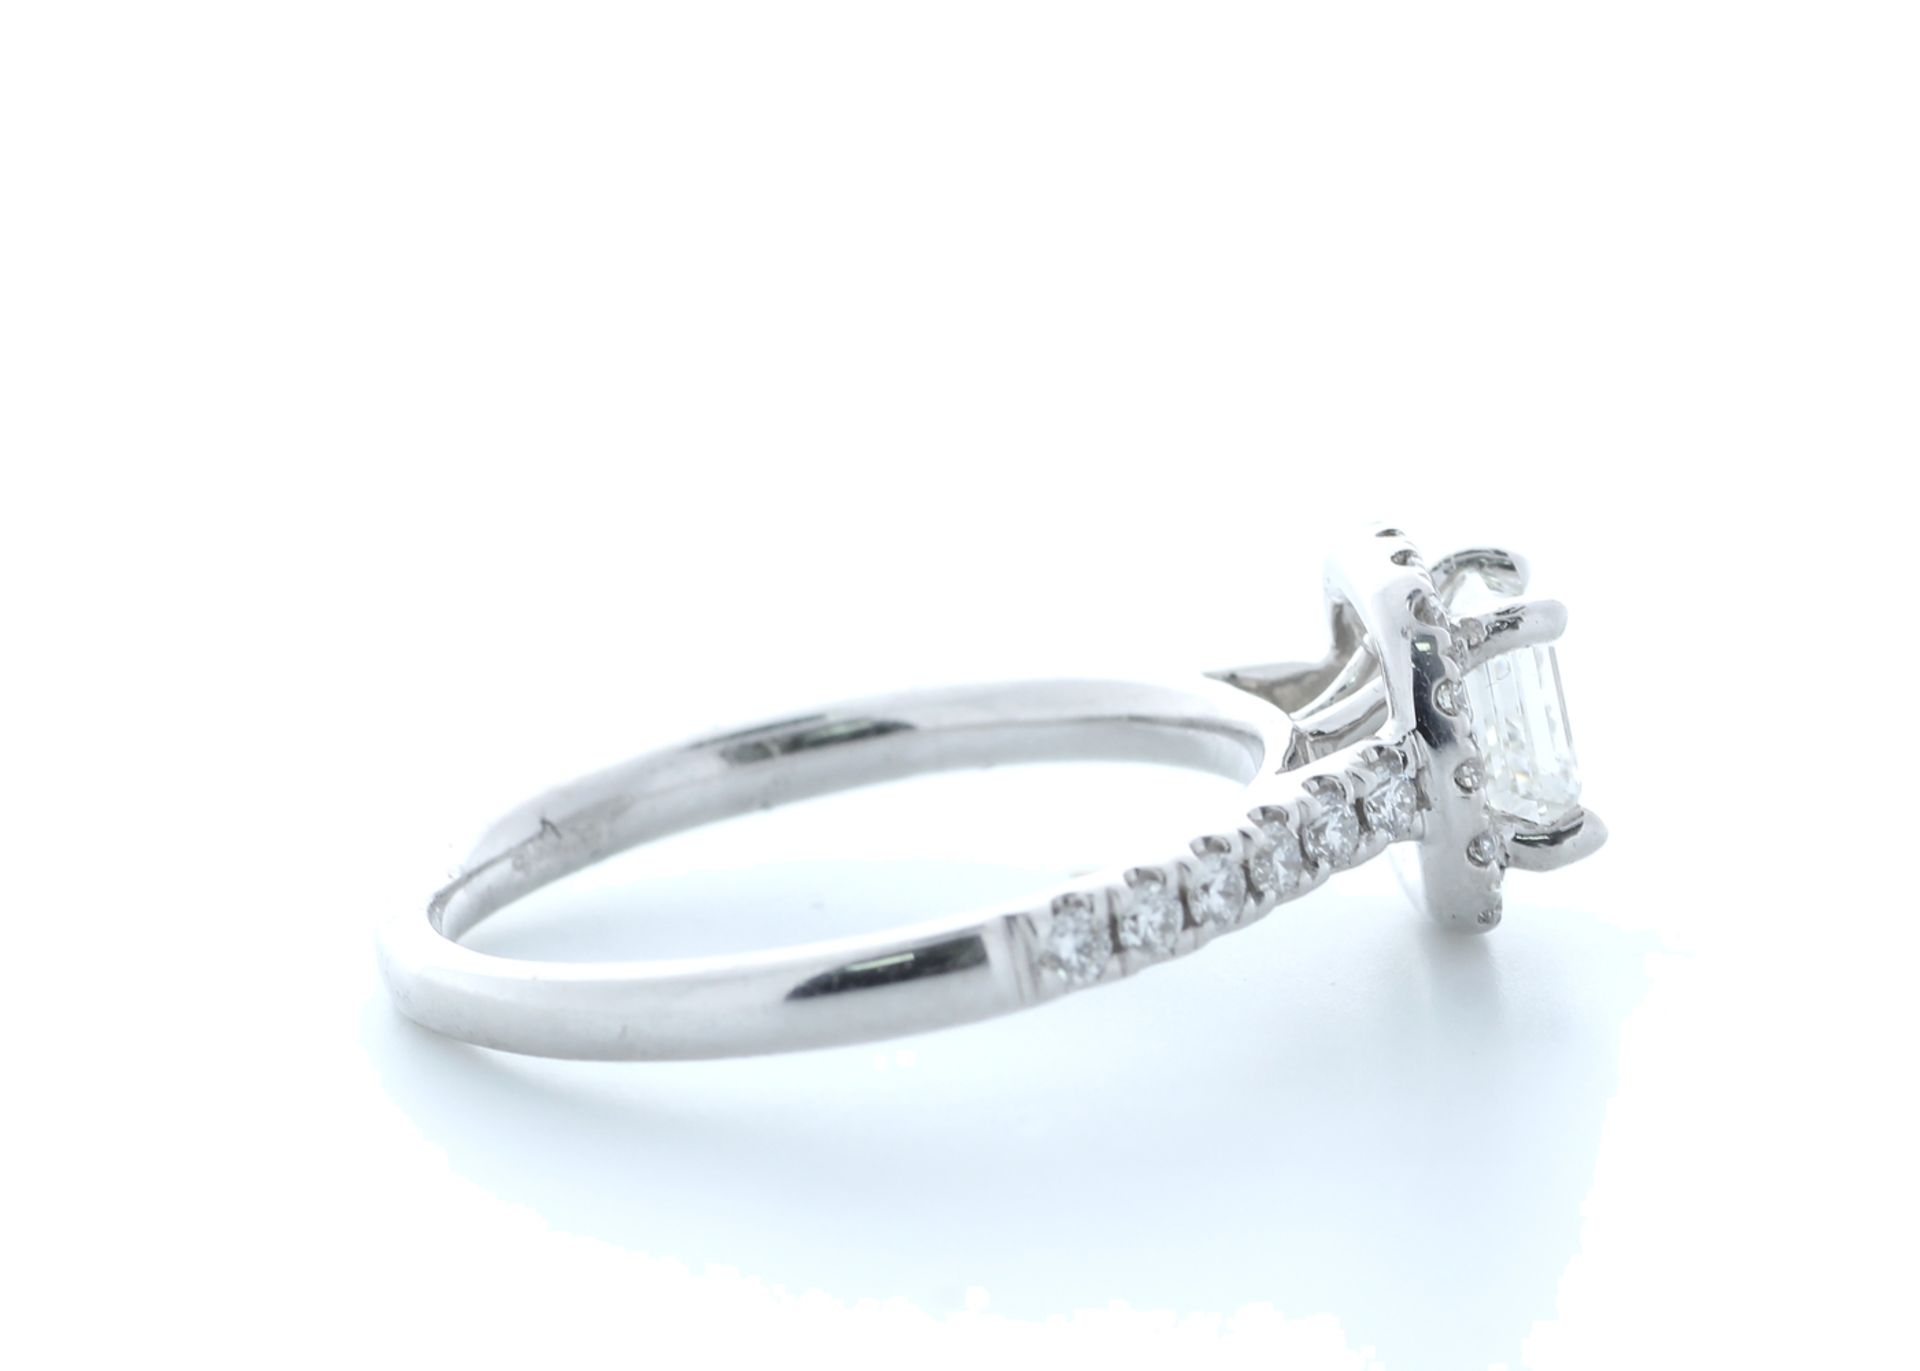 18ct White Gold Flawless Asscher Cut Diamond Ring 1.00 (0.71) Carats - Valued by IDI £18,000.00 - - Image 4 of 5